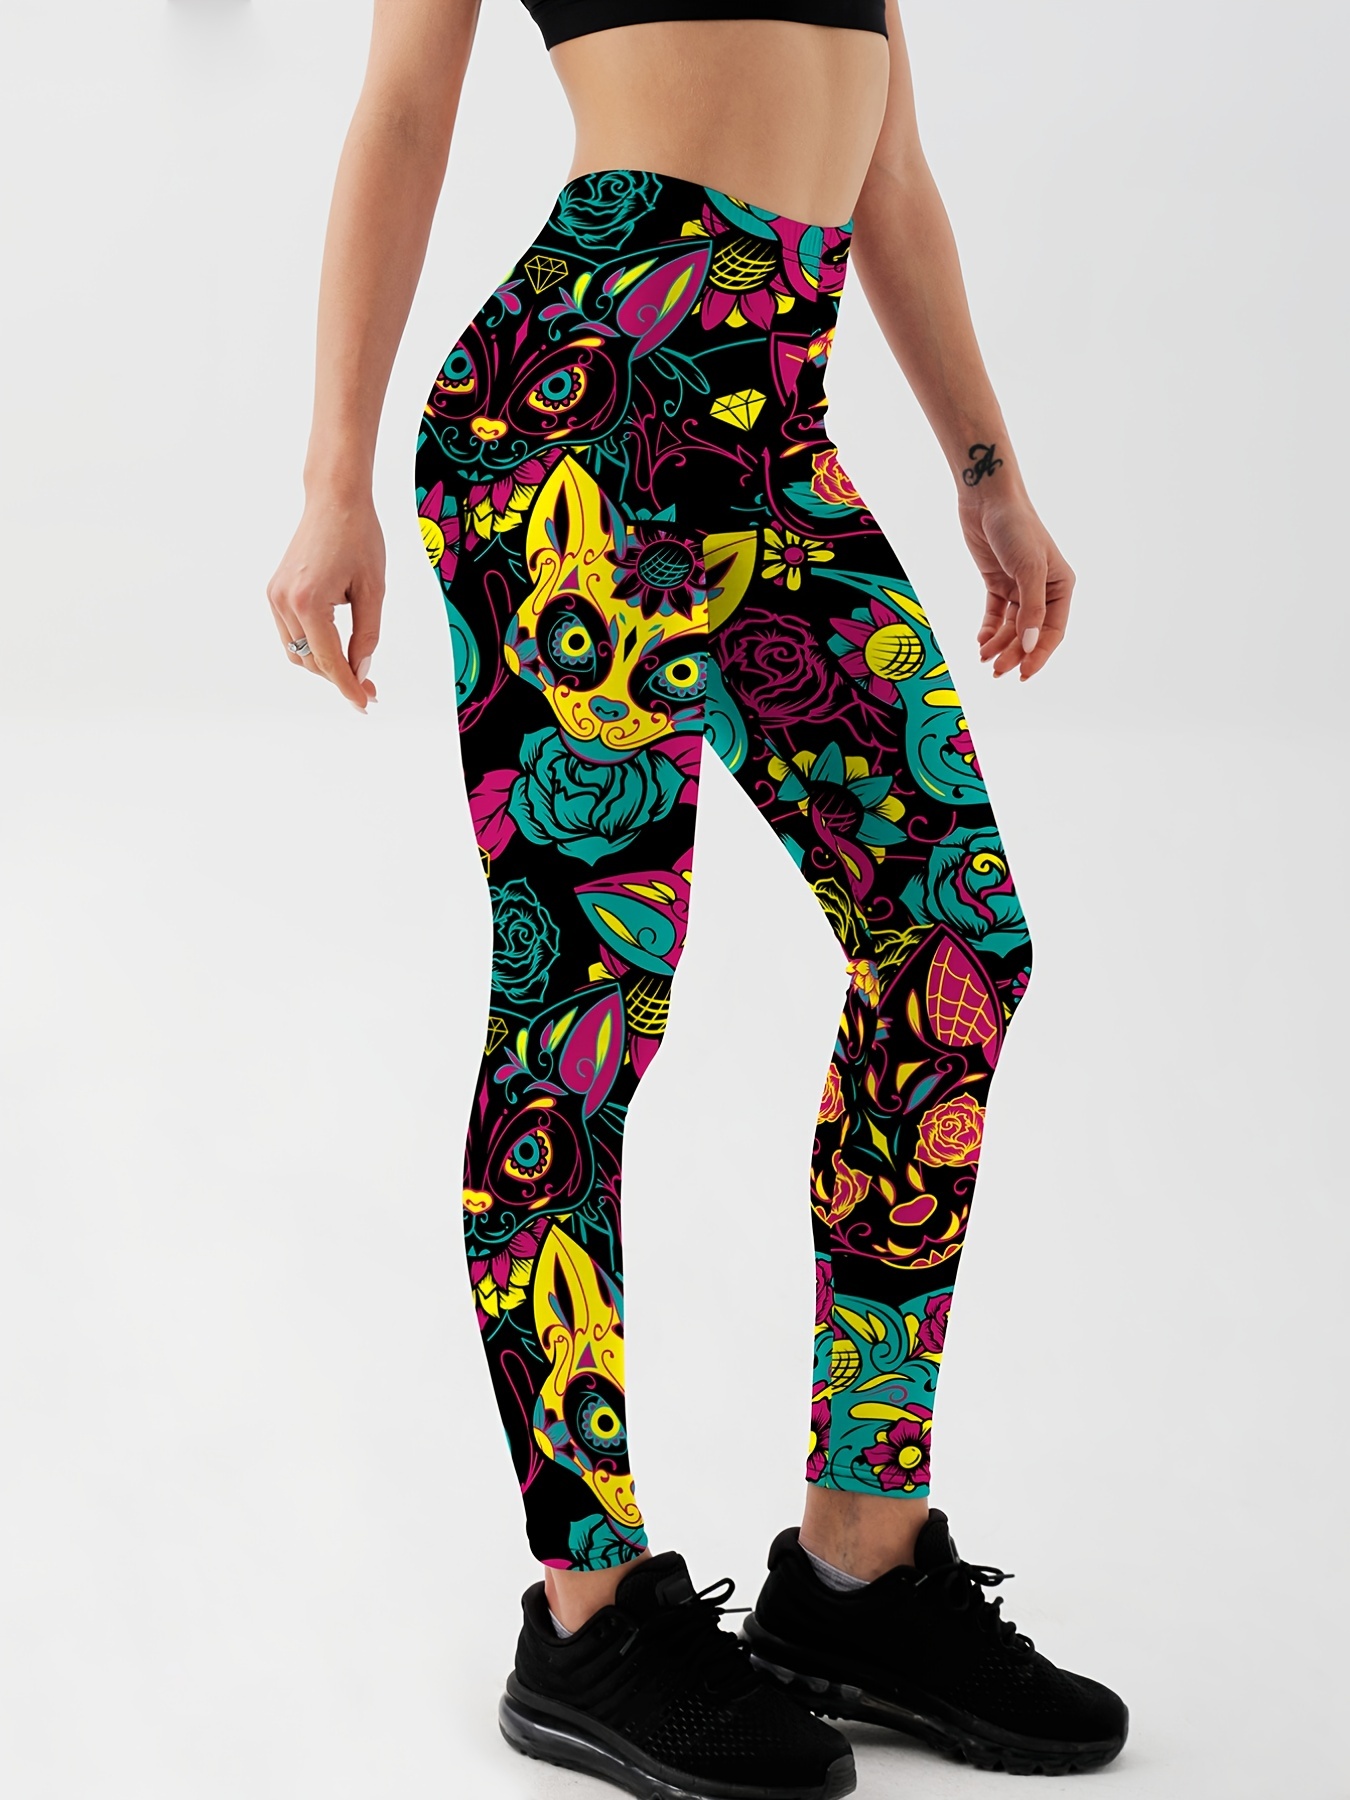 Stylish Floral Graphic Yoga Leggings - High Stretch Printed Workout Pants  for Women's Activewear